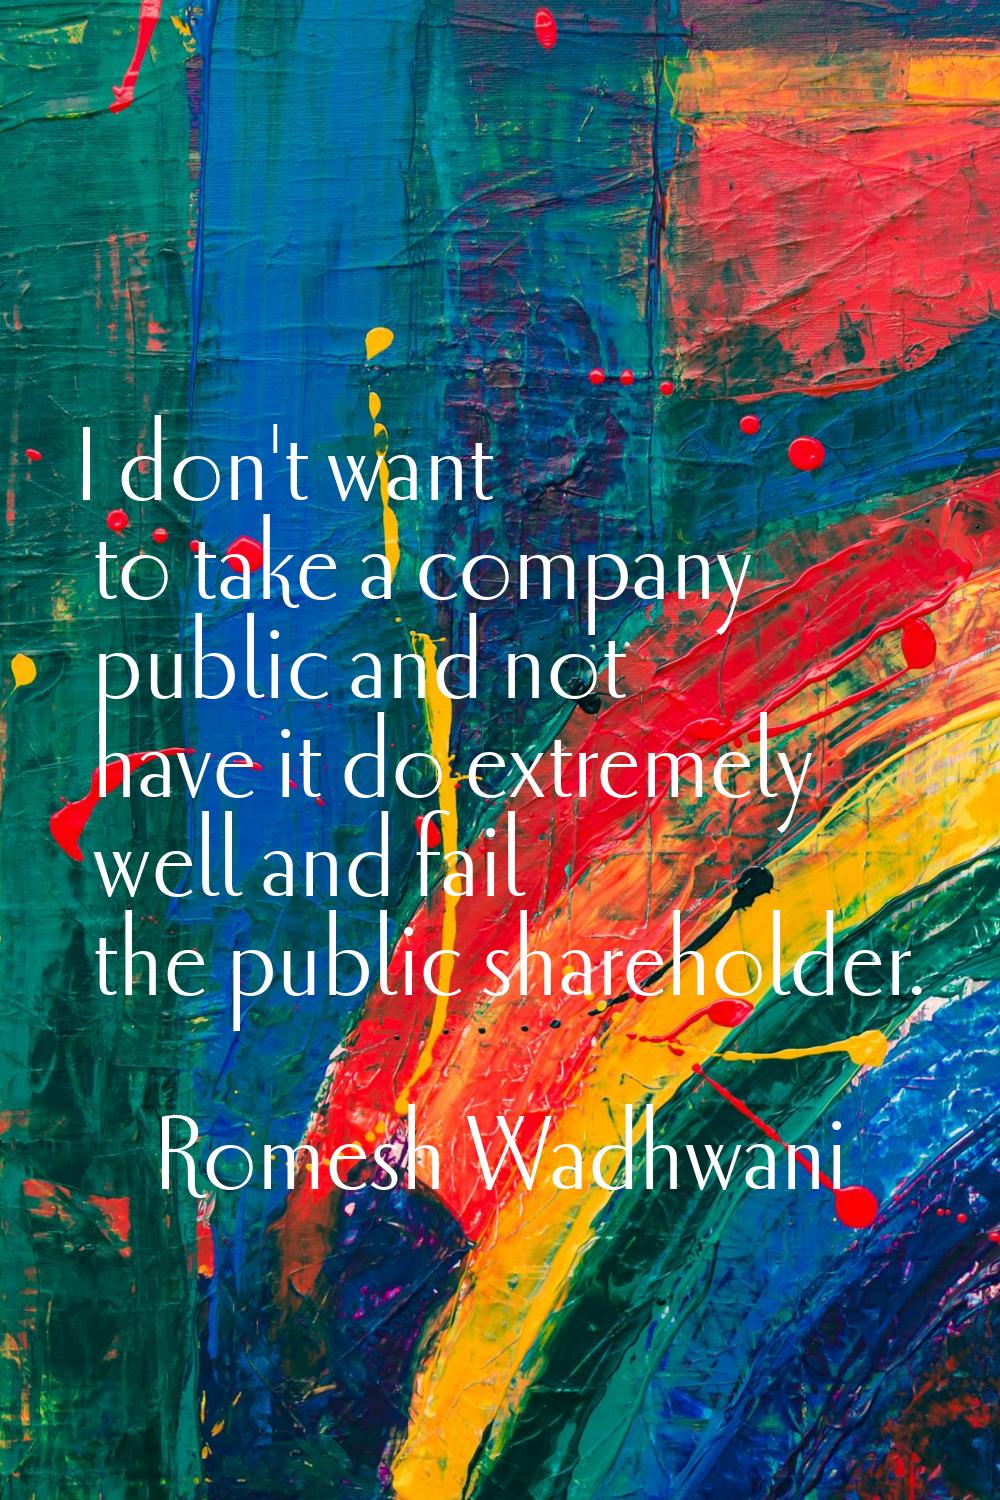 I don't want to take a company public and not have it do extremely well and fail the public shareho